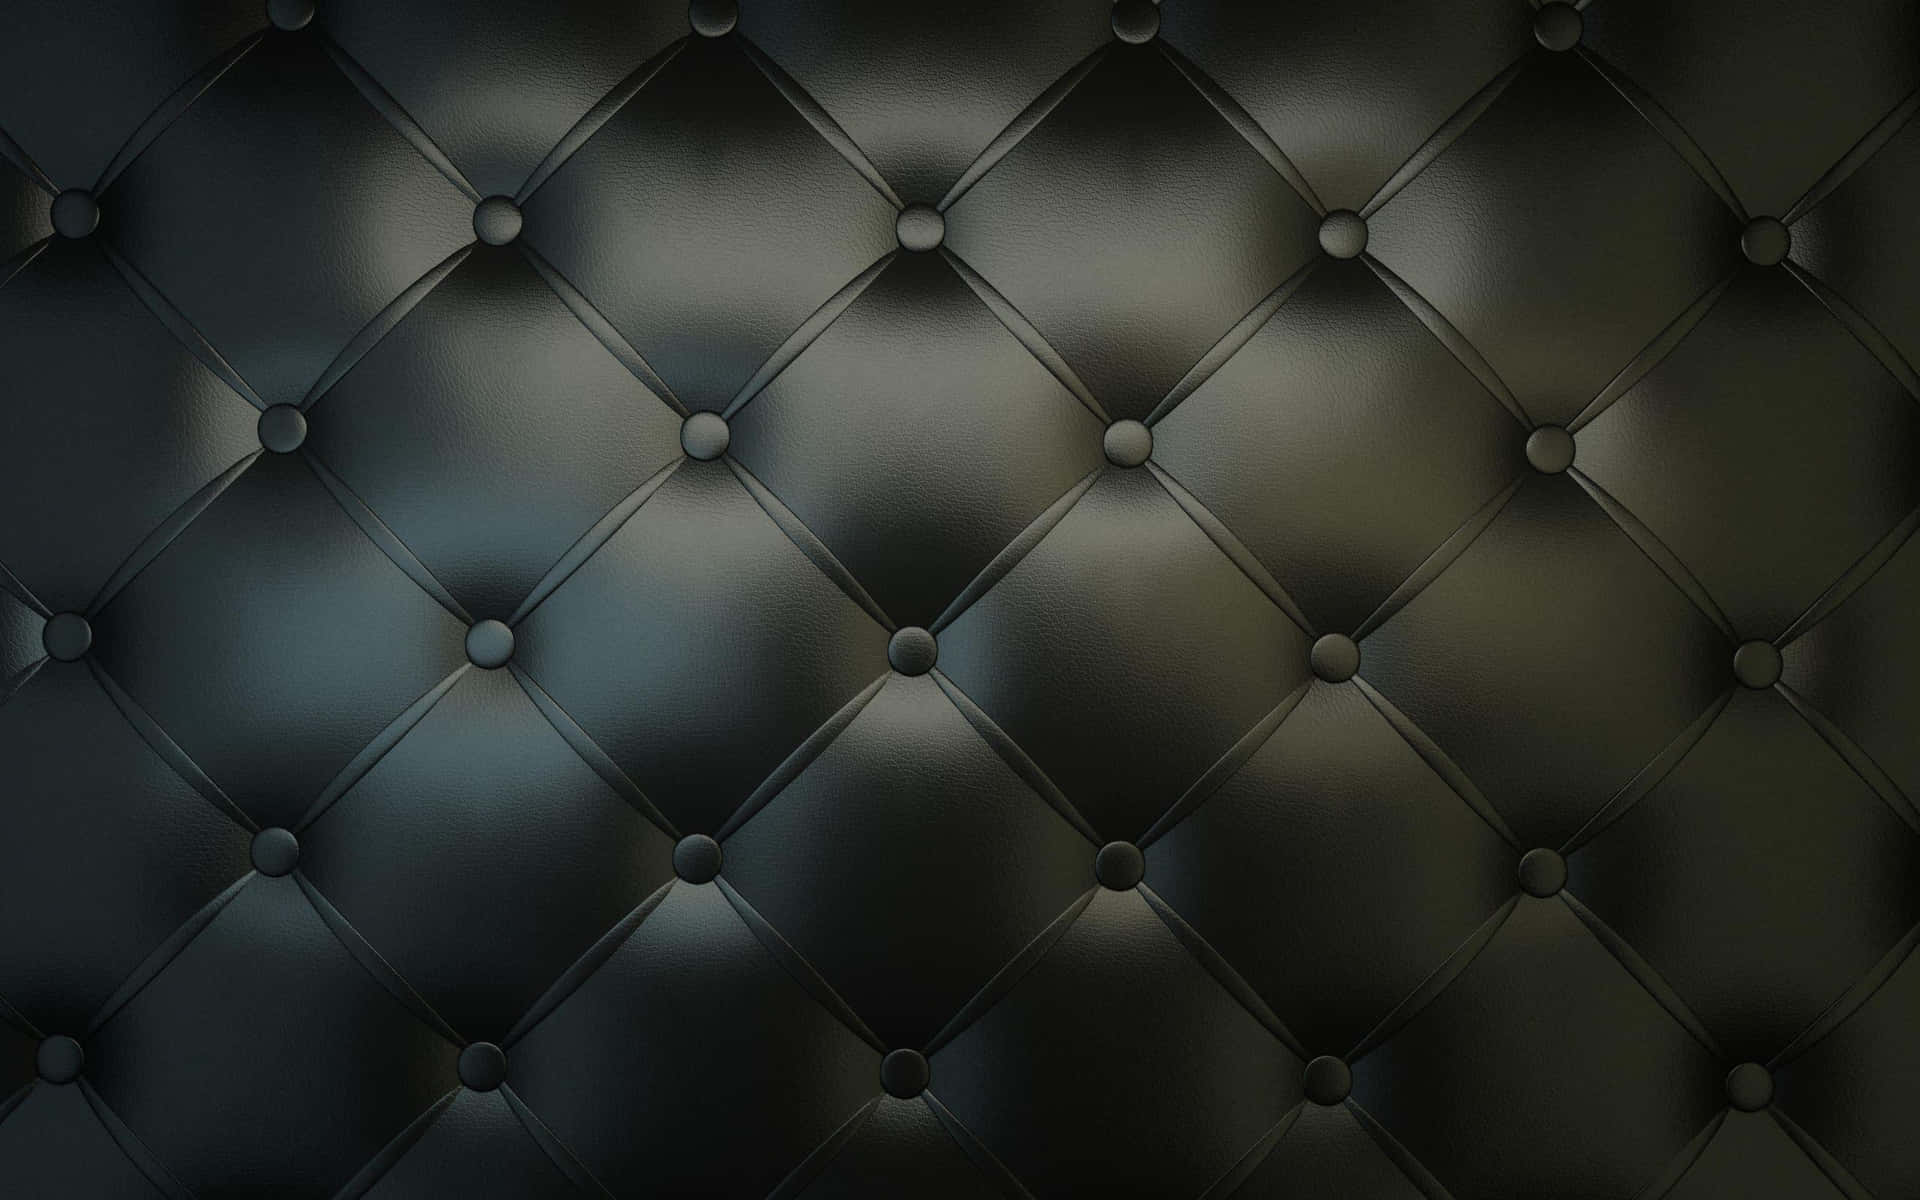 Extravagant Smooth Tufted Black Leather Wallpaper